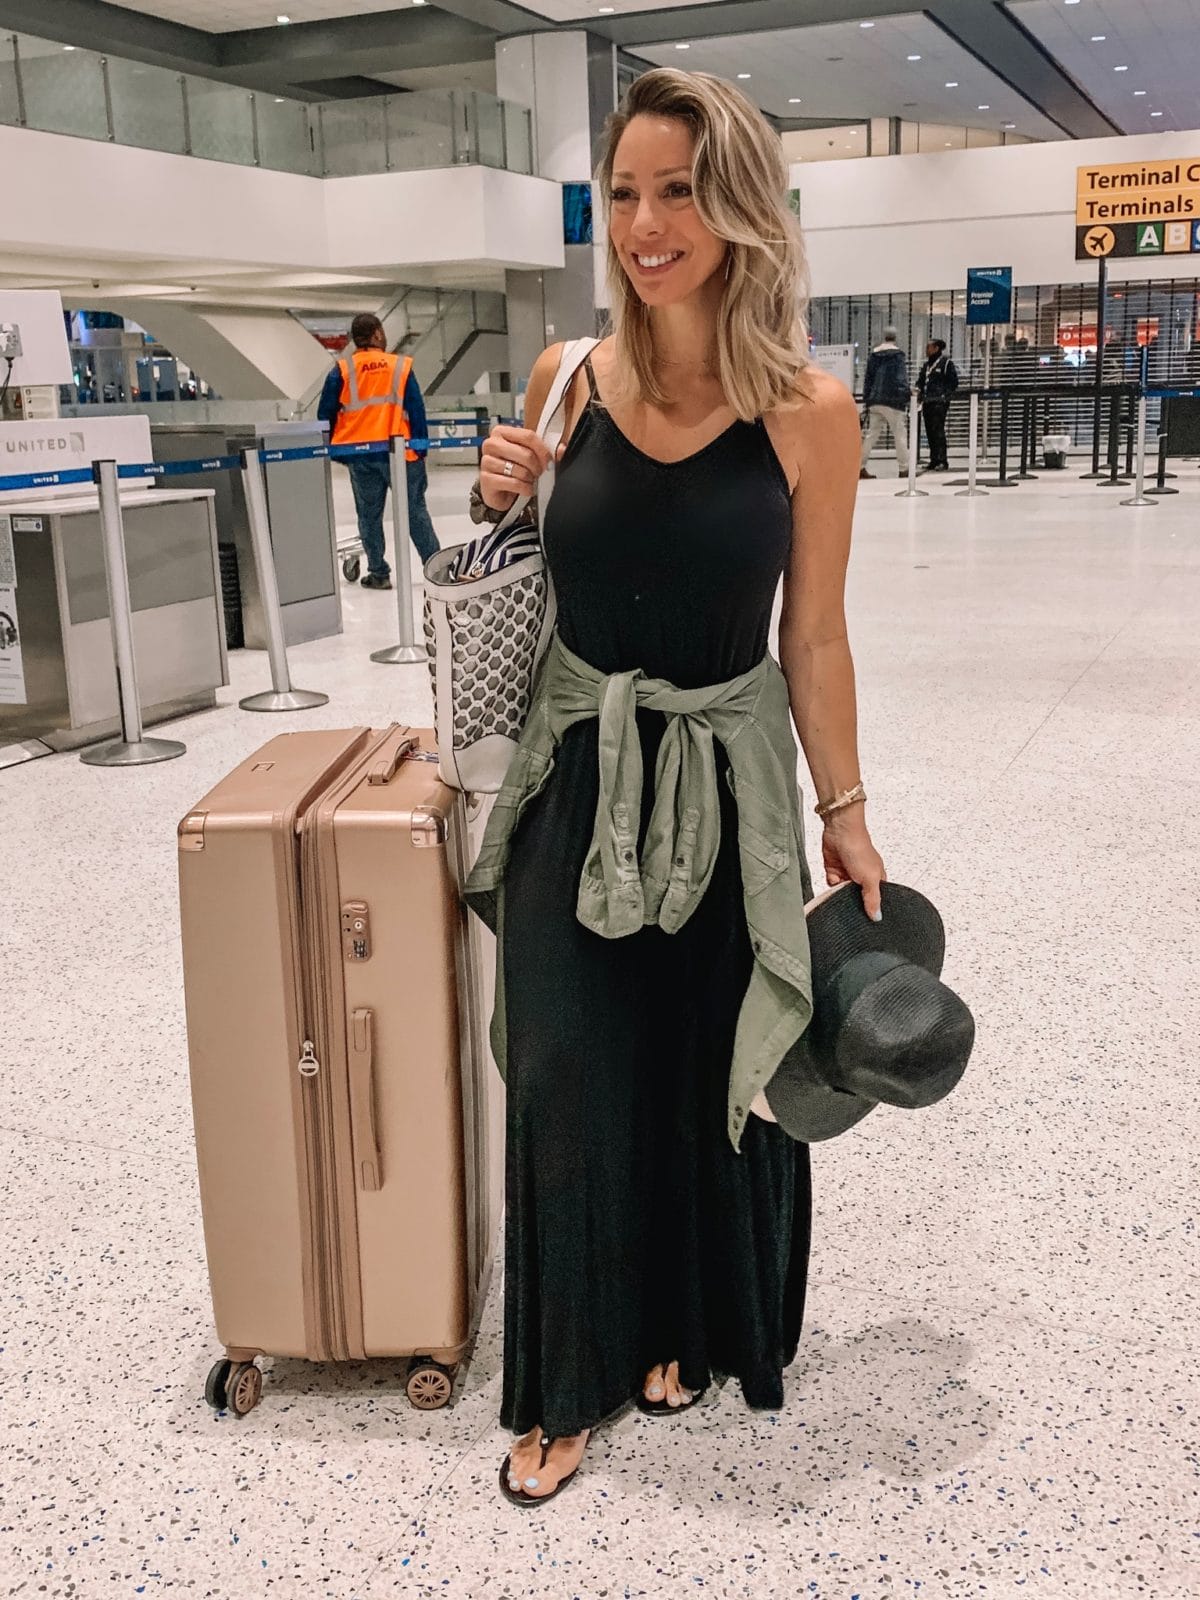 Maxi dress - comfy travel outfit